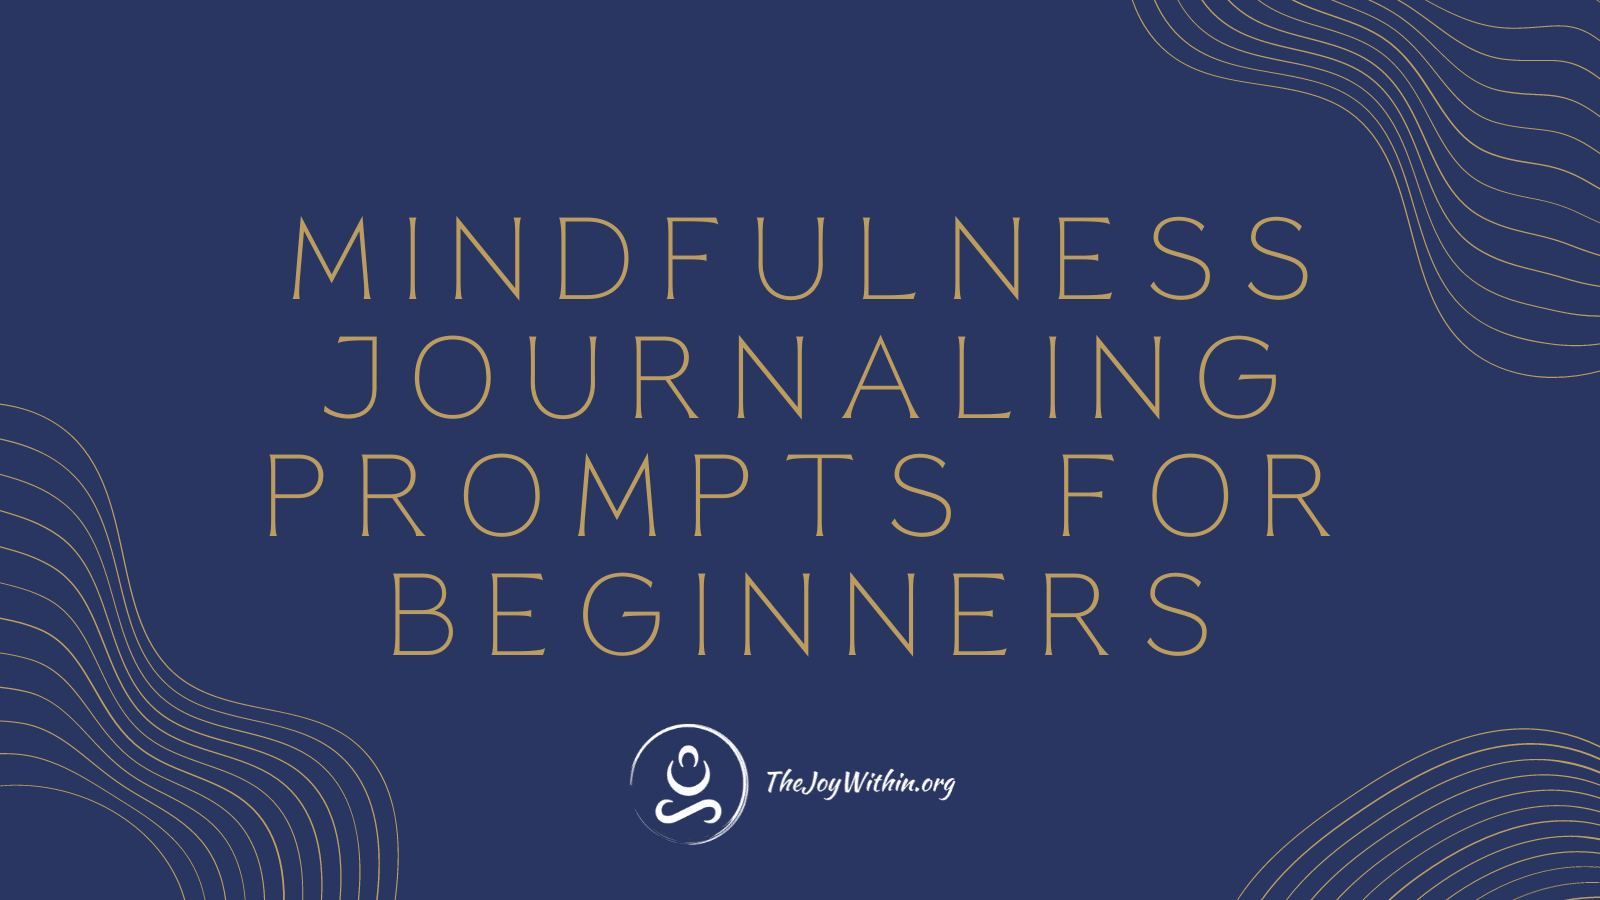 You are currently viewing Mindfulness Journaling Prompts For Beginners